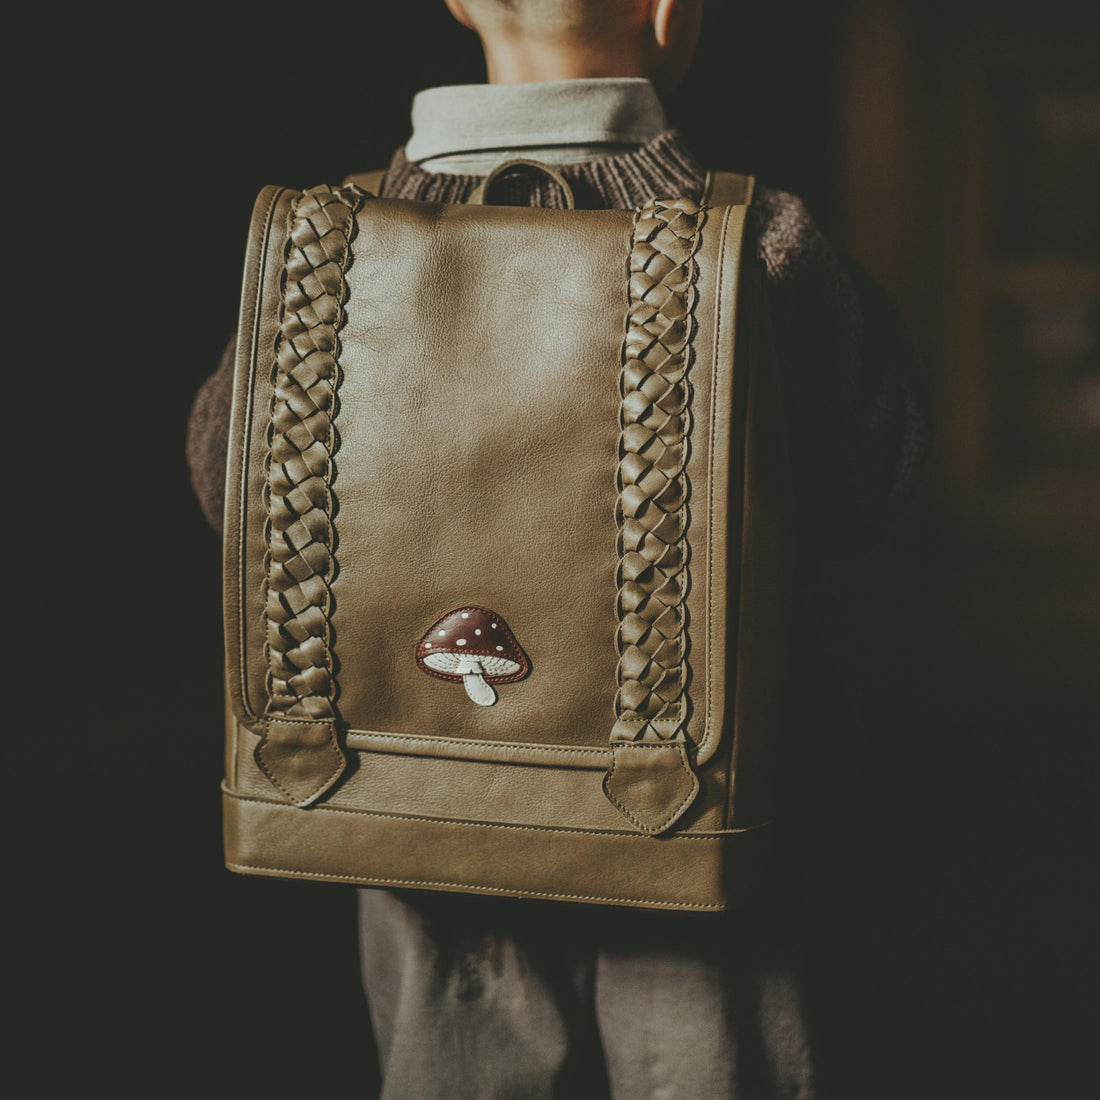 Hikey Schoolbag | Toadstool | Army Leather